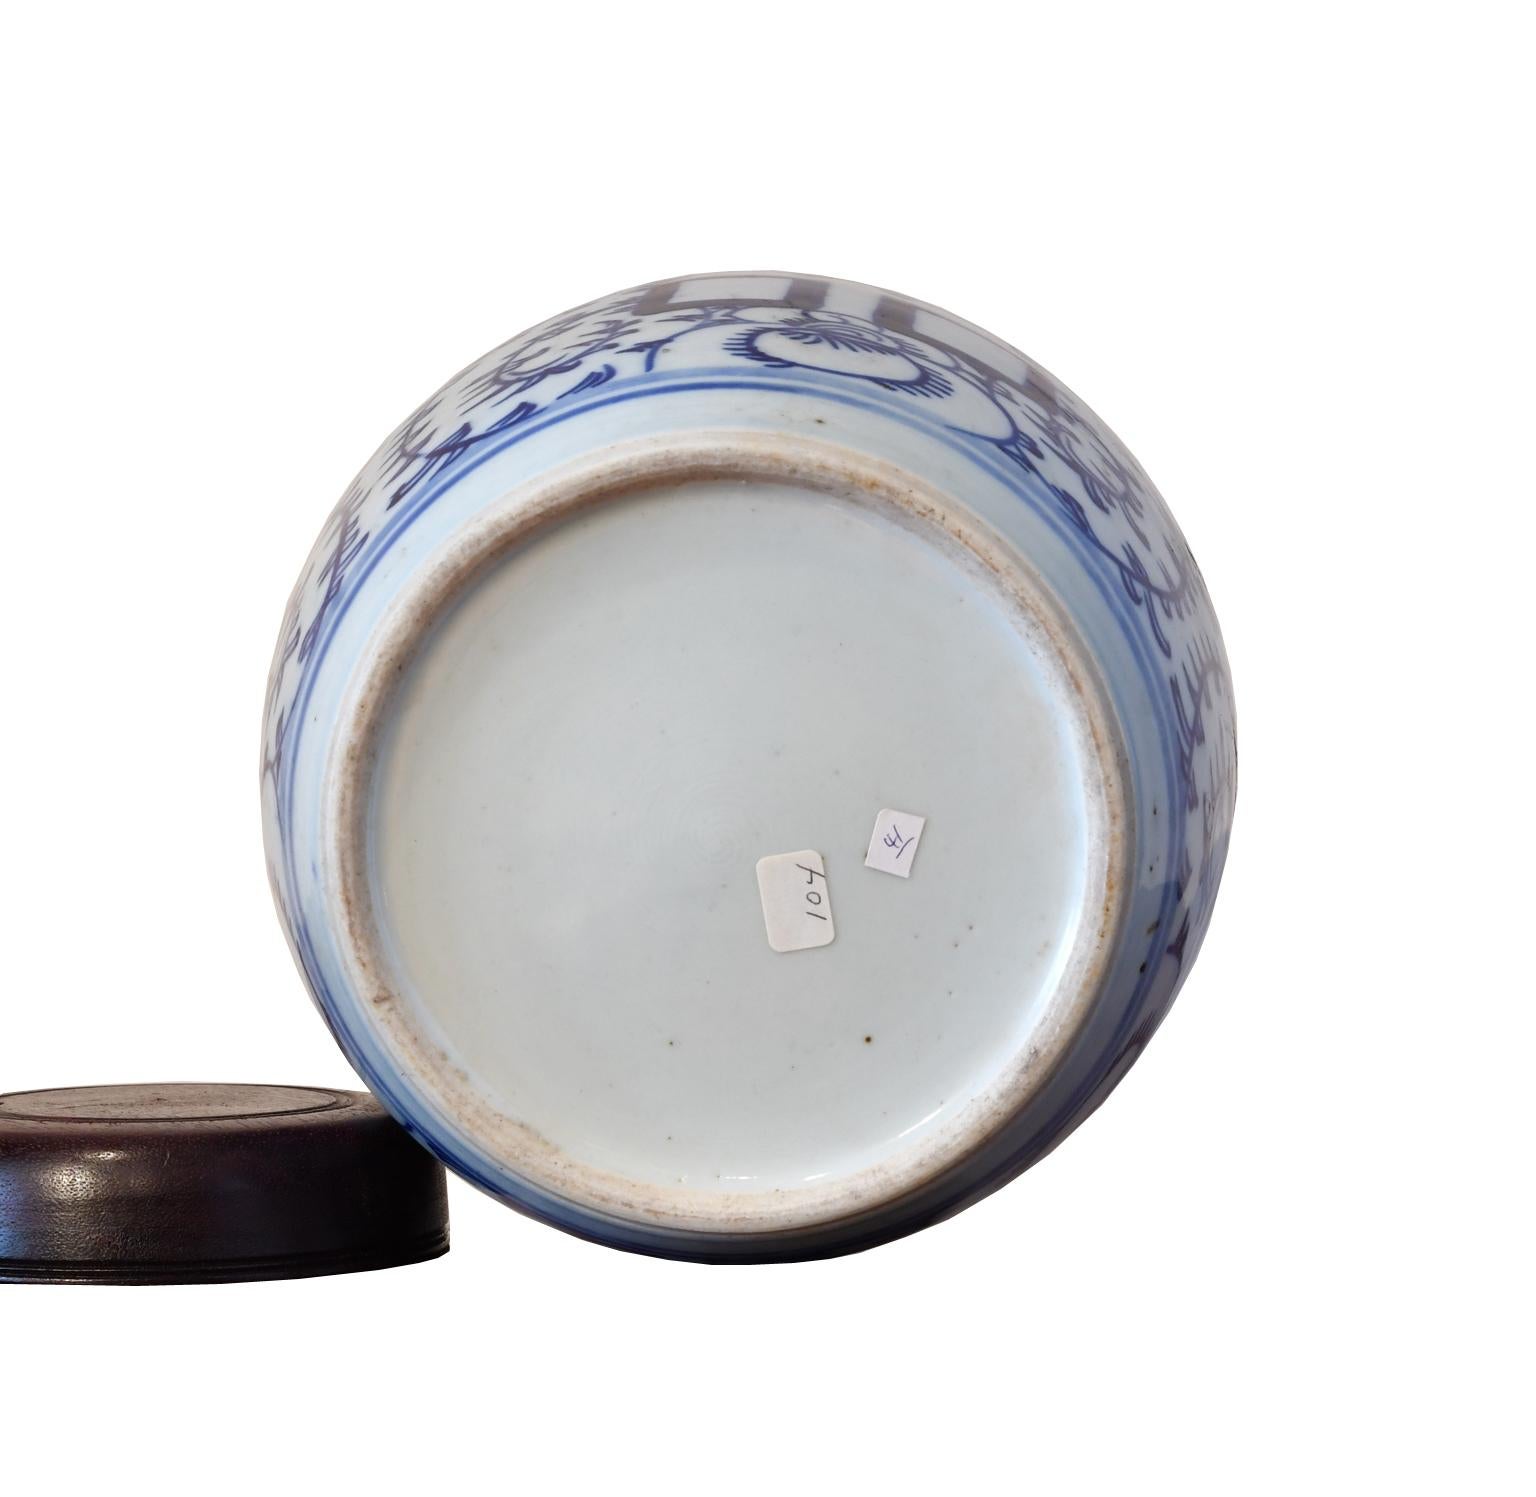 Turned Qing Chinese Porcelain Blue and White Shuang-xi Jar with Double Happiness